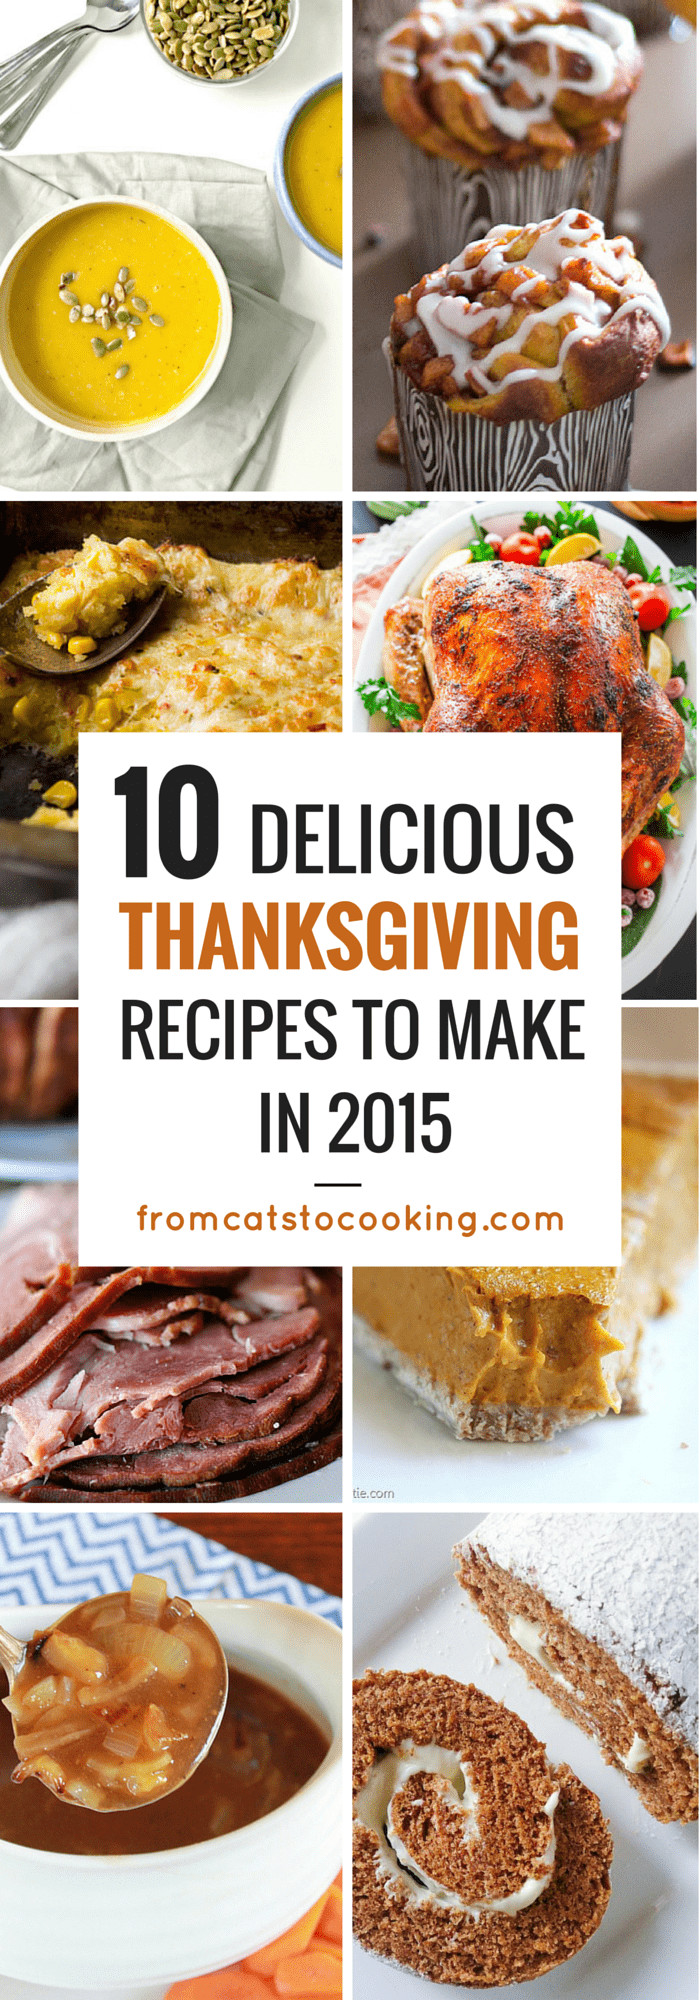 Delicious Turkey Recipes For Thanksgiving
 10 Delicious Thanksgiving Recipes to Make in 2015